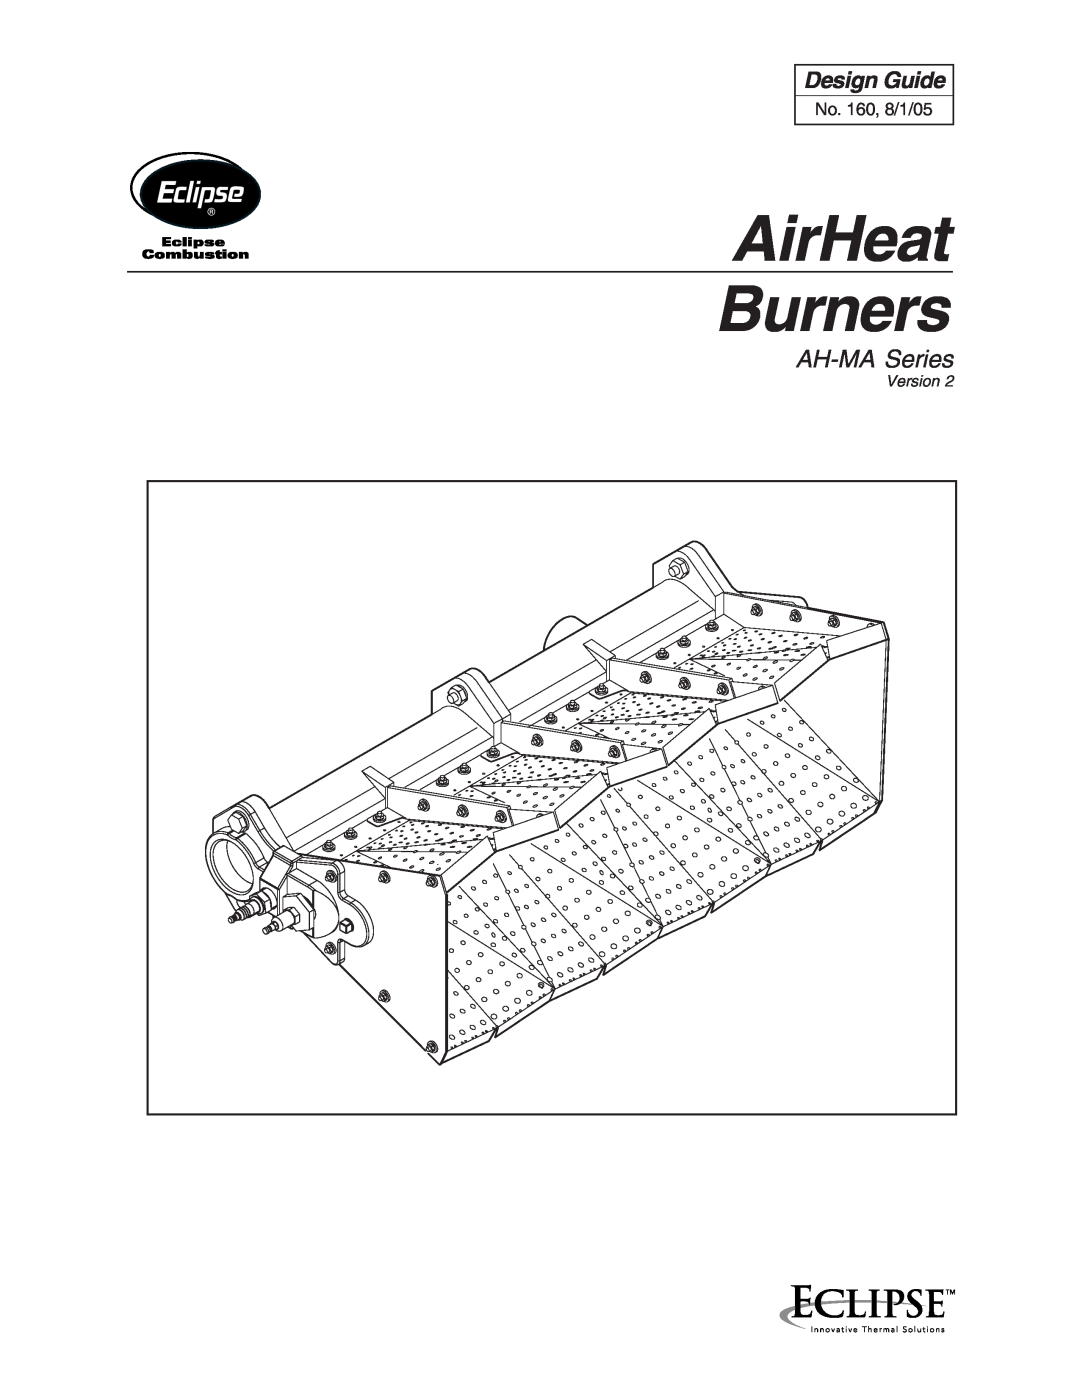 Eclipse Combustion manual AirHeat Burners, AH-MASeries, Design Guide, No. 160, 8/1/05, Version 